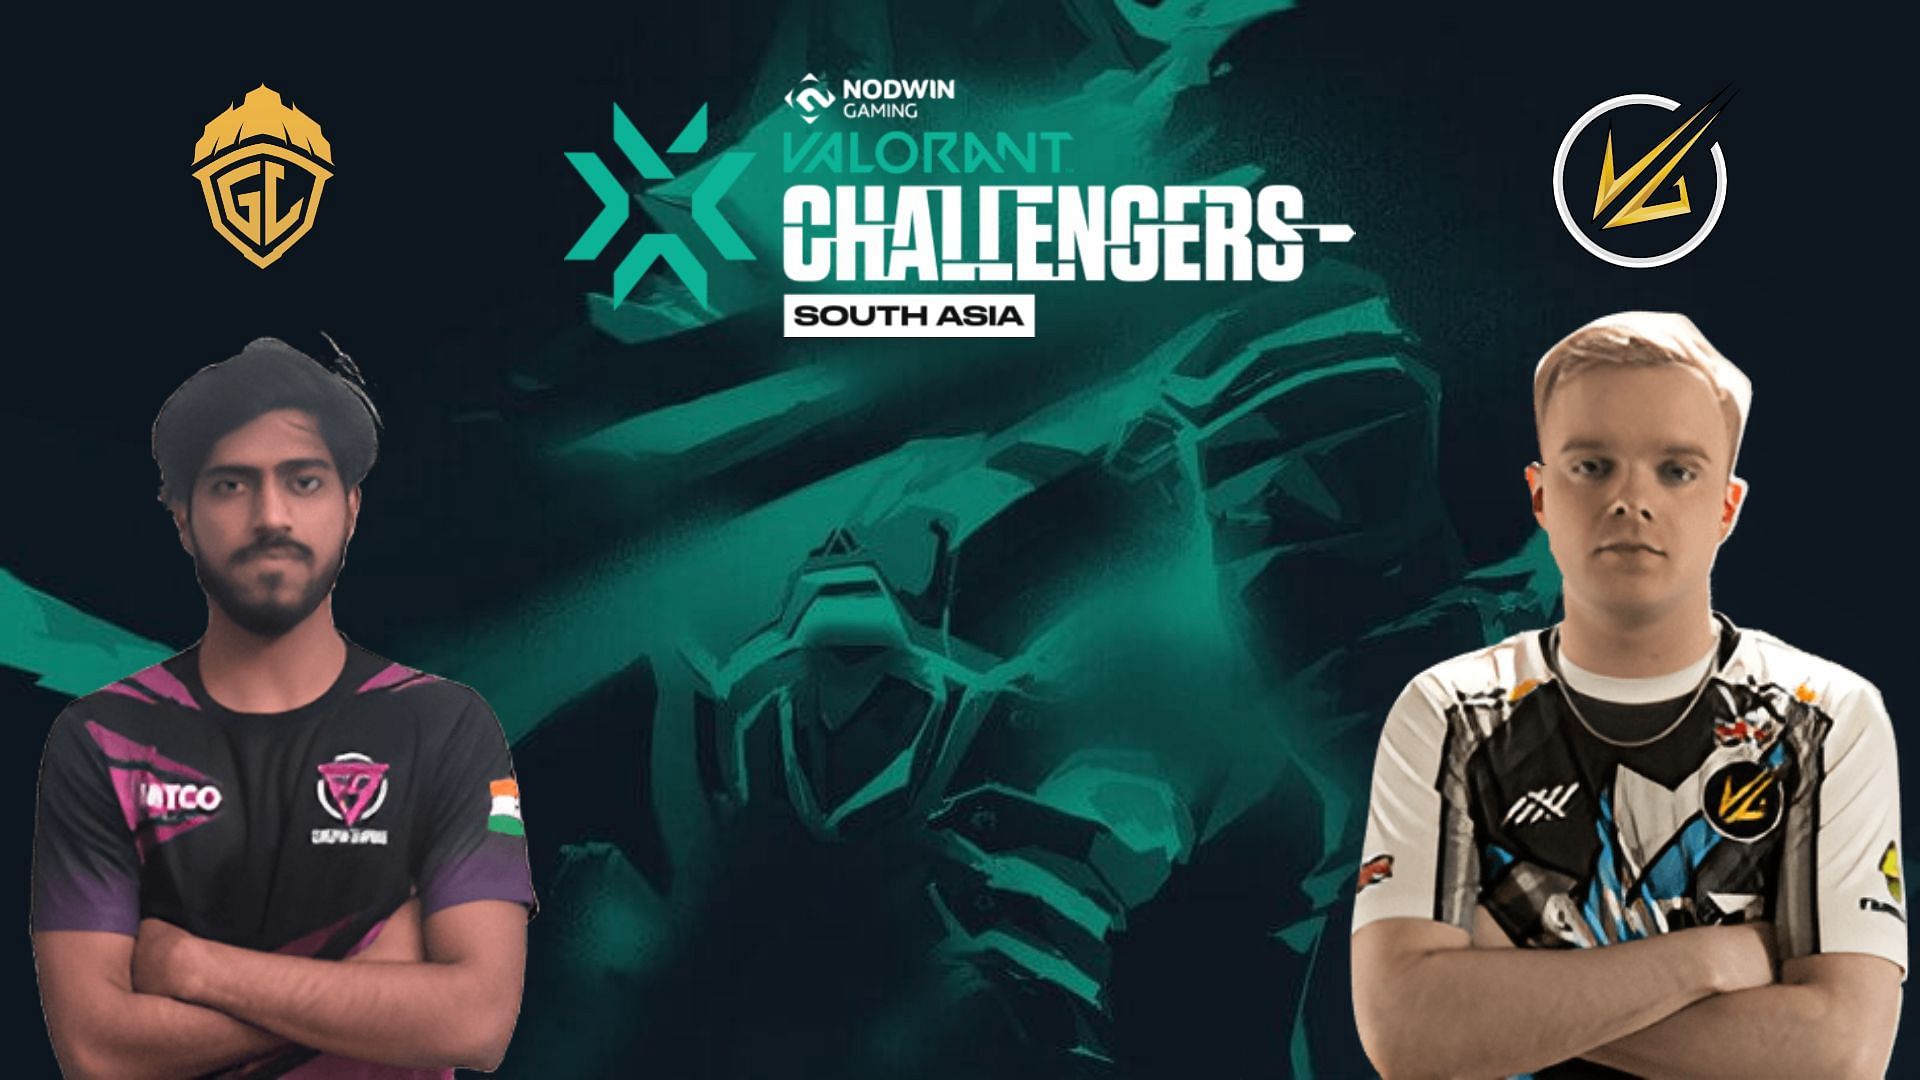 GodLike Esports vs Velocity Gaming - Valorant Challengers South Asia: Predictions, where to watch, and more(image via Sportskeeda)